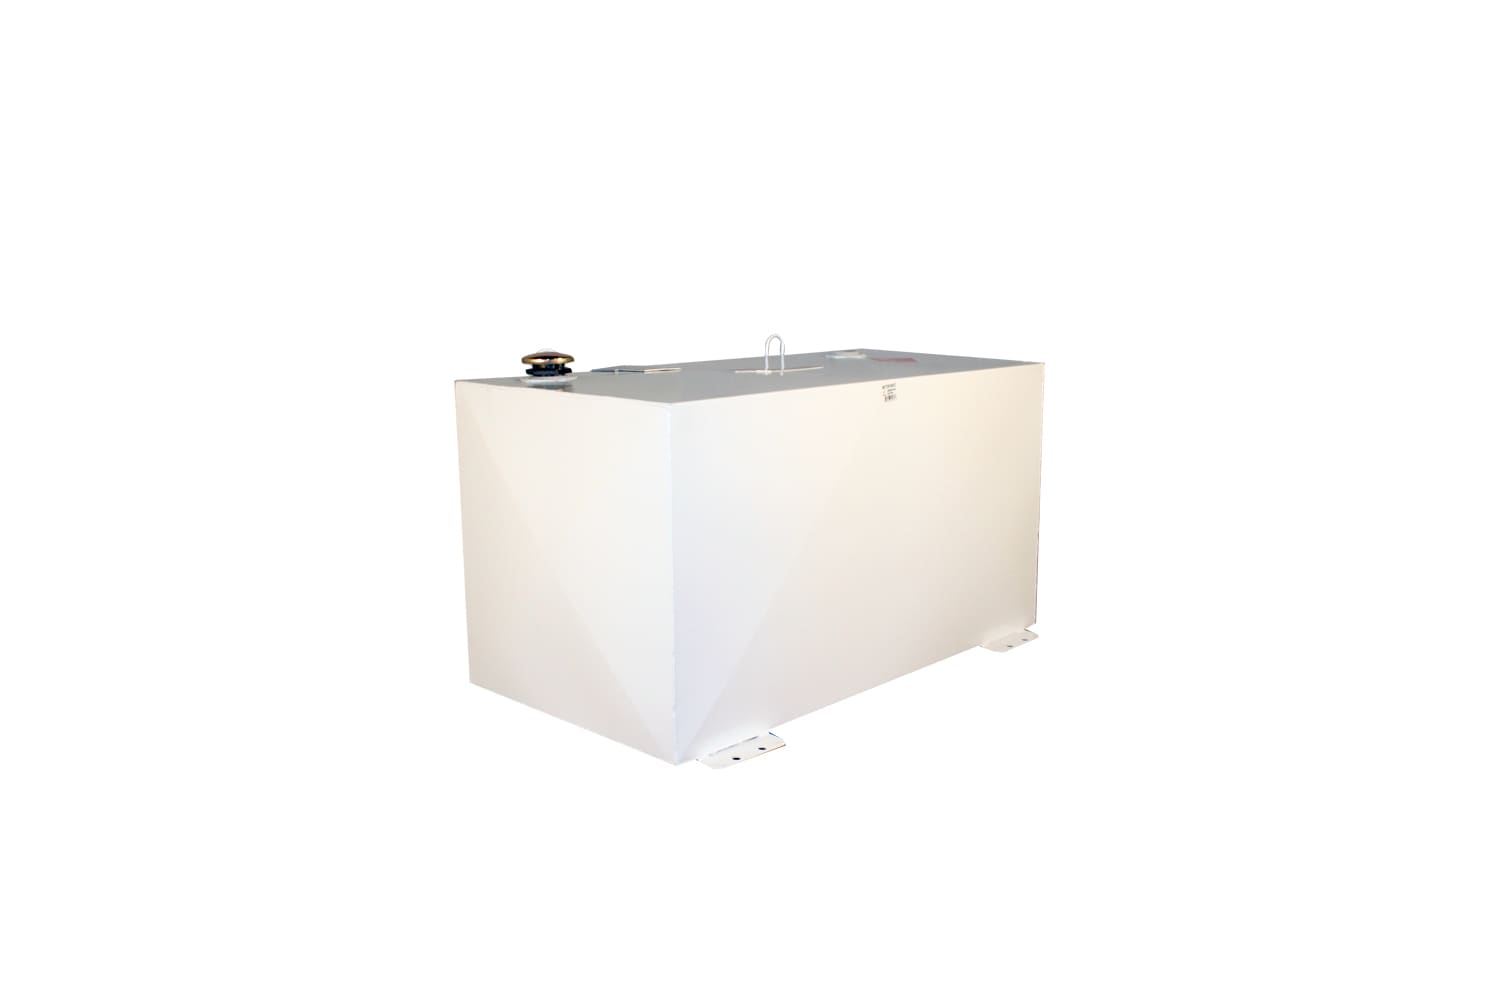 Dee Zee 111 gal. Brite-Tread Aluminum L-Shaped Transfer Tank with Chest  Box, Black at Tractor Supply Co.